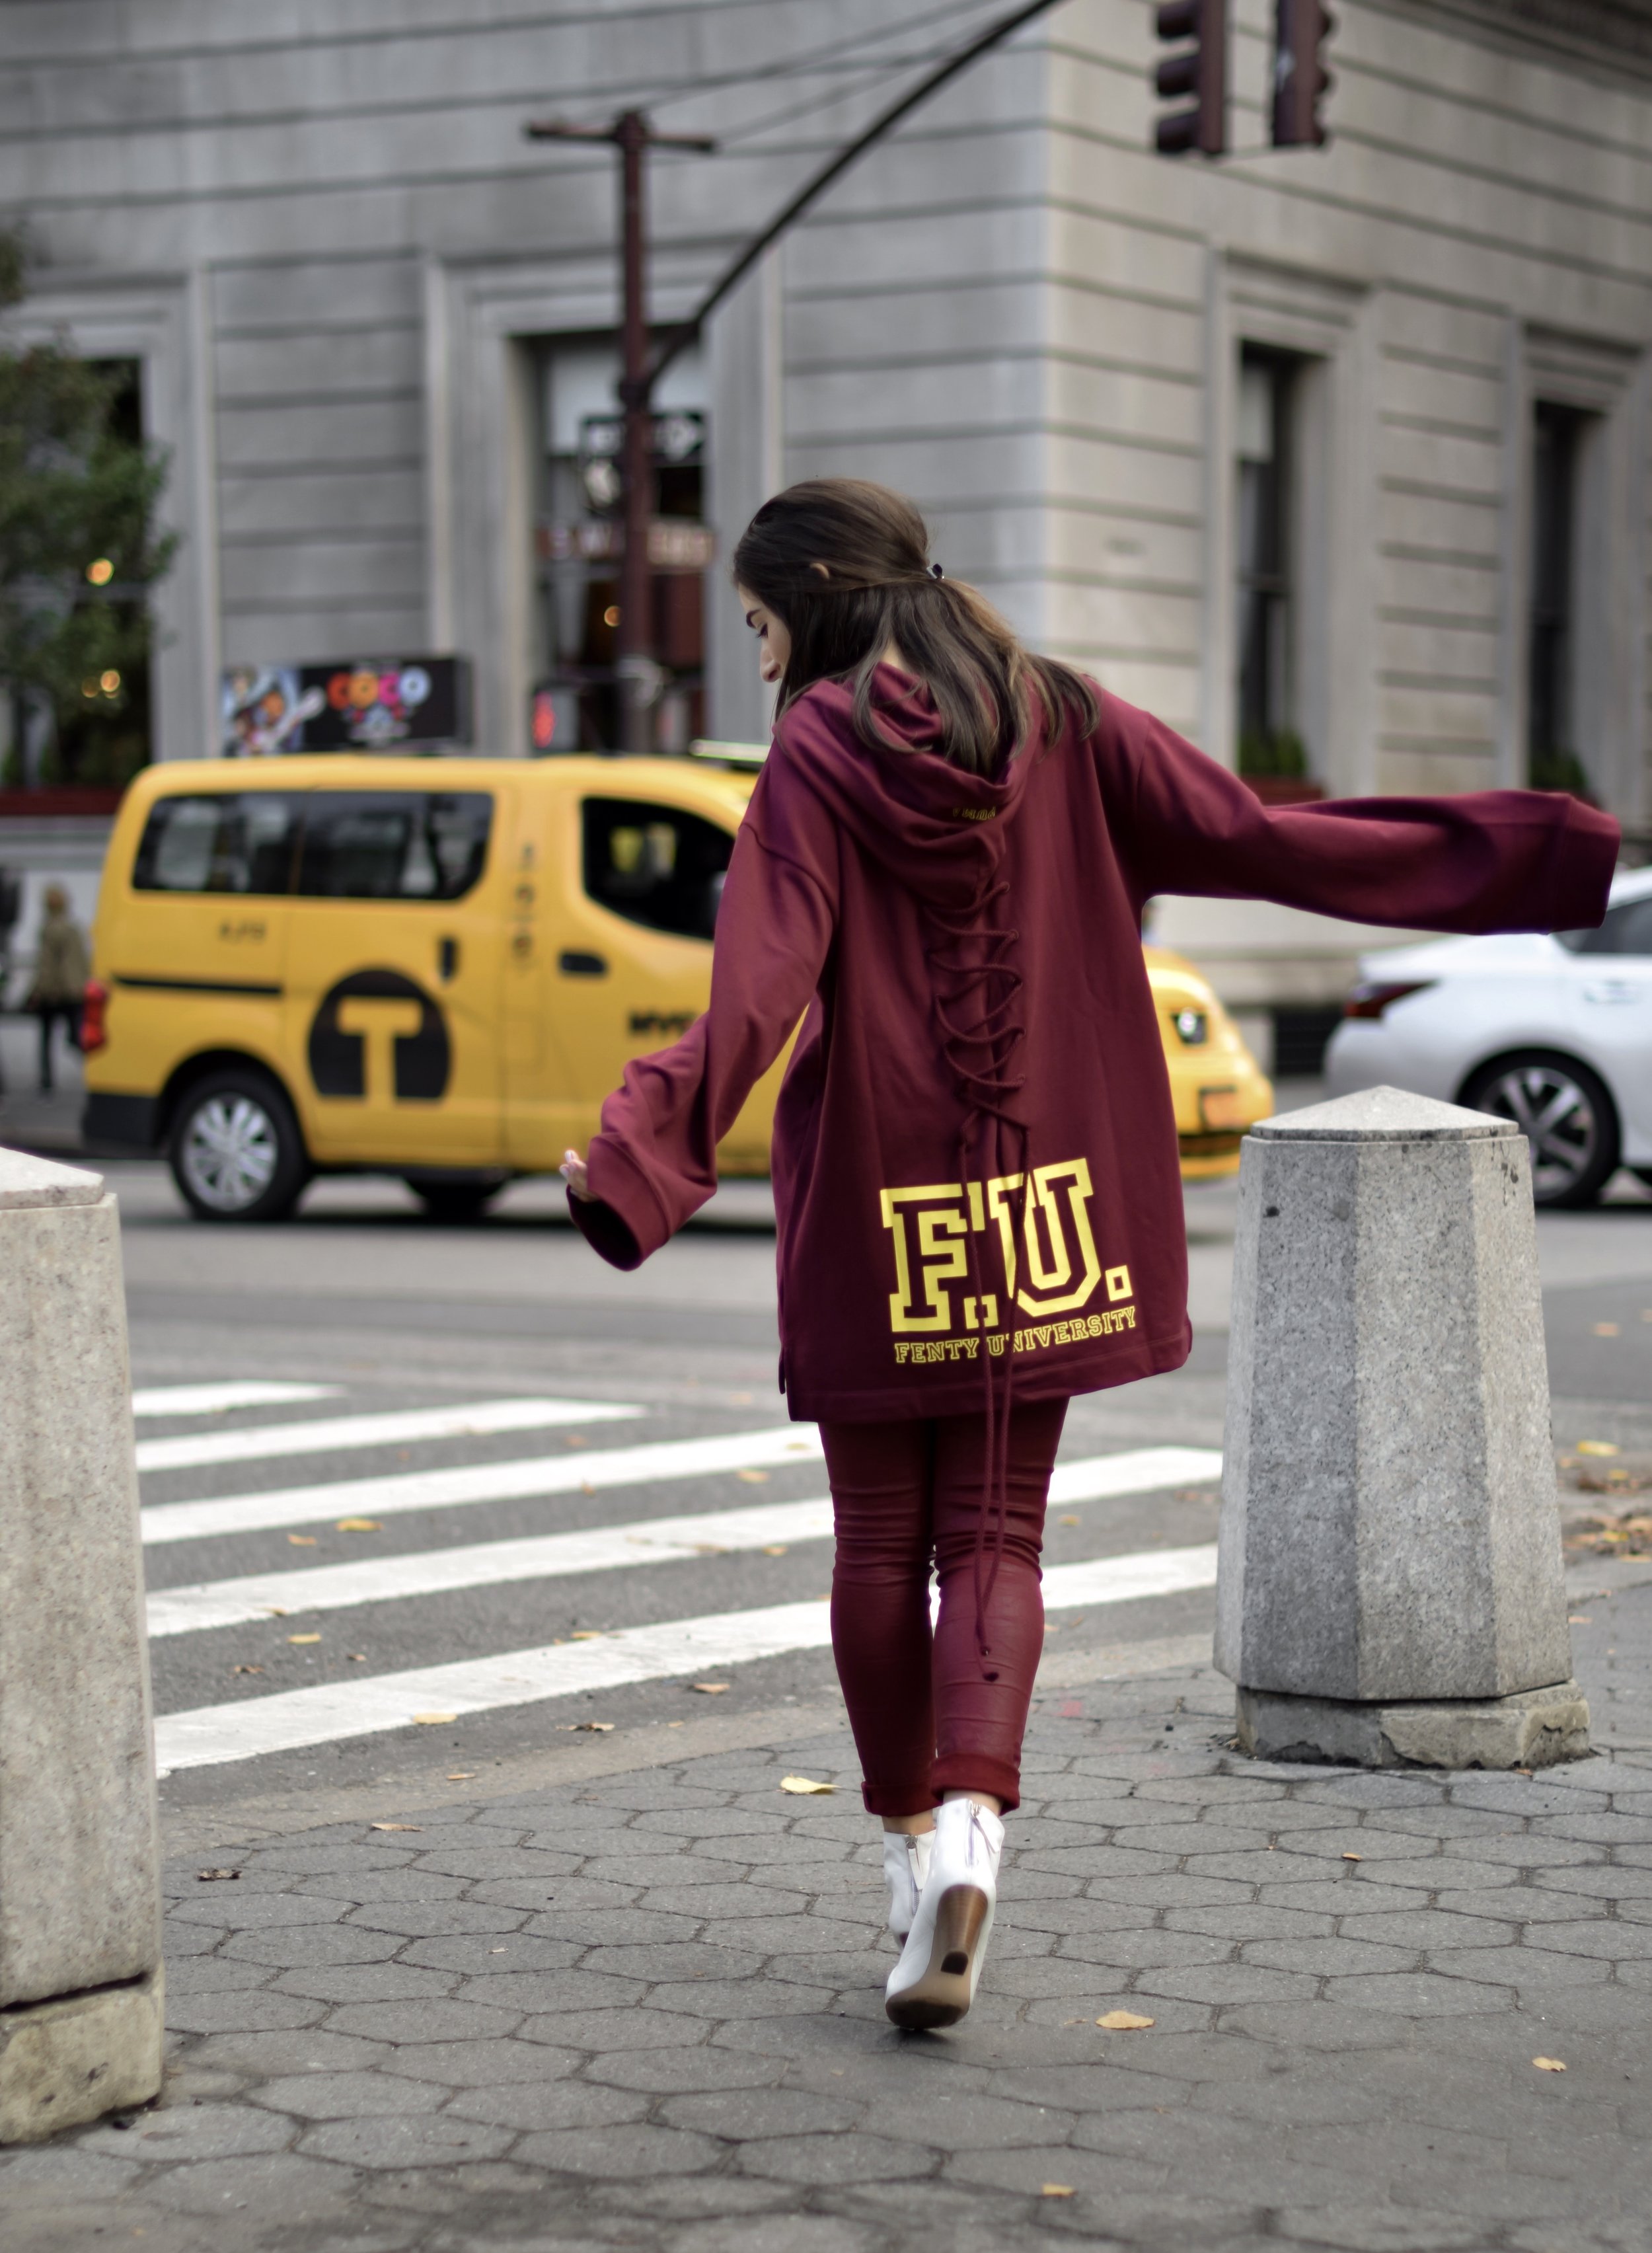 What Do Bloggers Still Pay For Monochrome Maroon Outfit White Booties Esther Santer Fashion Blog NYC Street Style Blogger Outfit OOTD Trendy Burgundy Color AG Jeans Fenty Puma Rihanna  Oversized Sweatshirt Girl Women Shopping Winter Fall Look New York.jpg